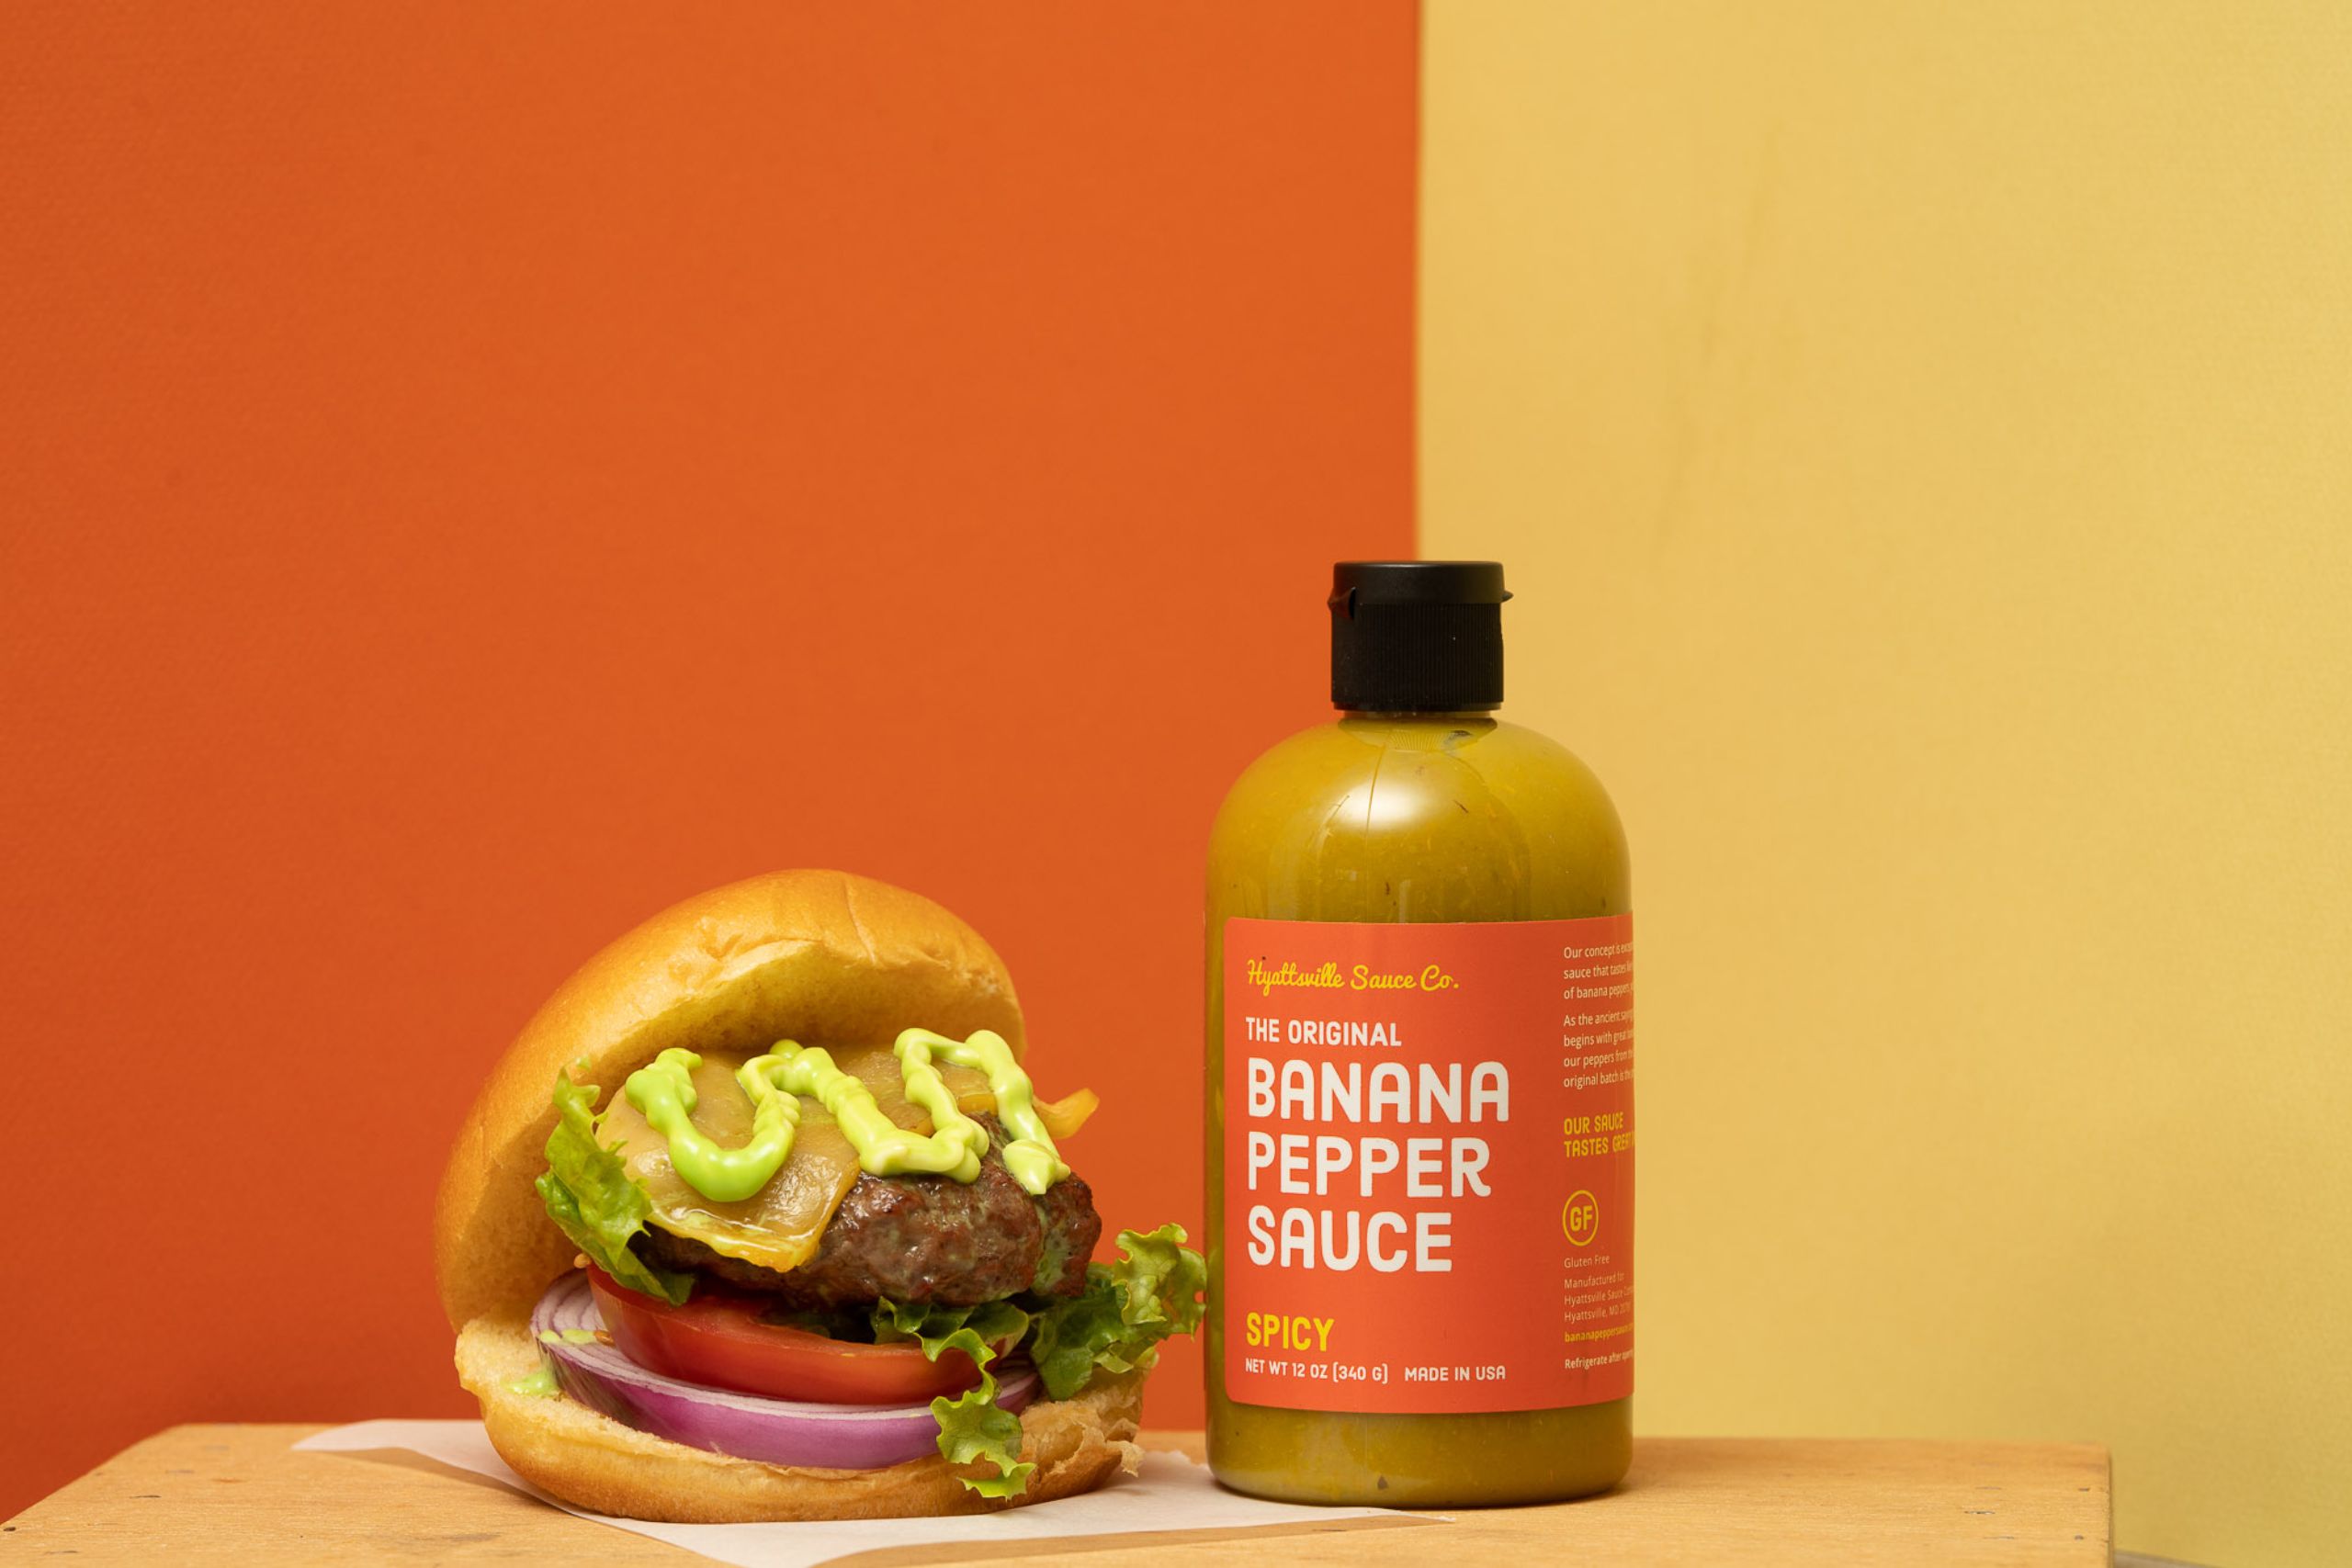 IU C&I Studios Page Banana Pepper Sauce bottle on display with loaded hamburger next to it